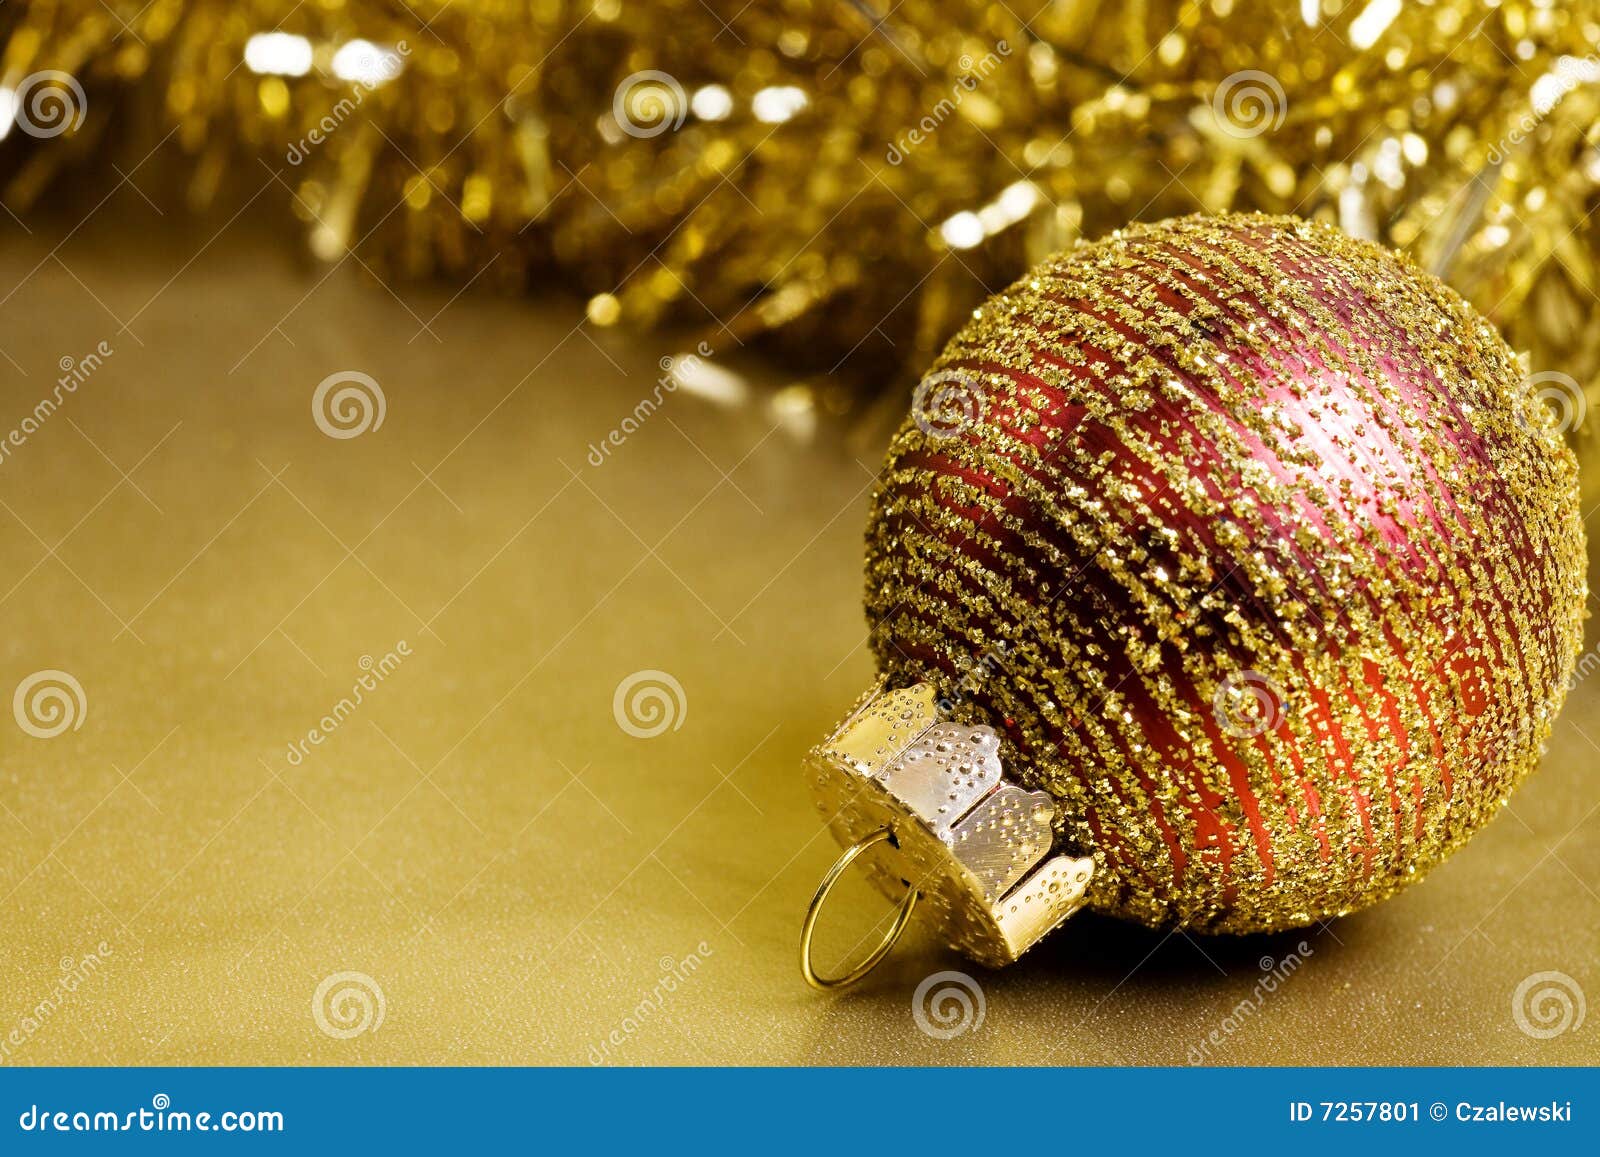 Christmas Ornaments with Glitter Background Stock Image - Image of ...